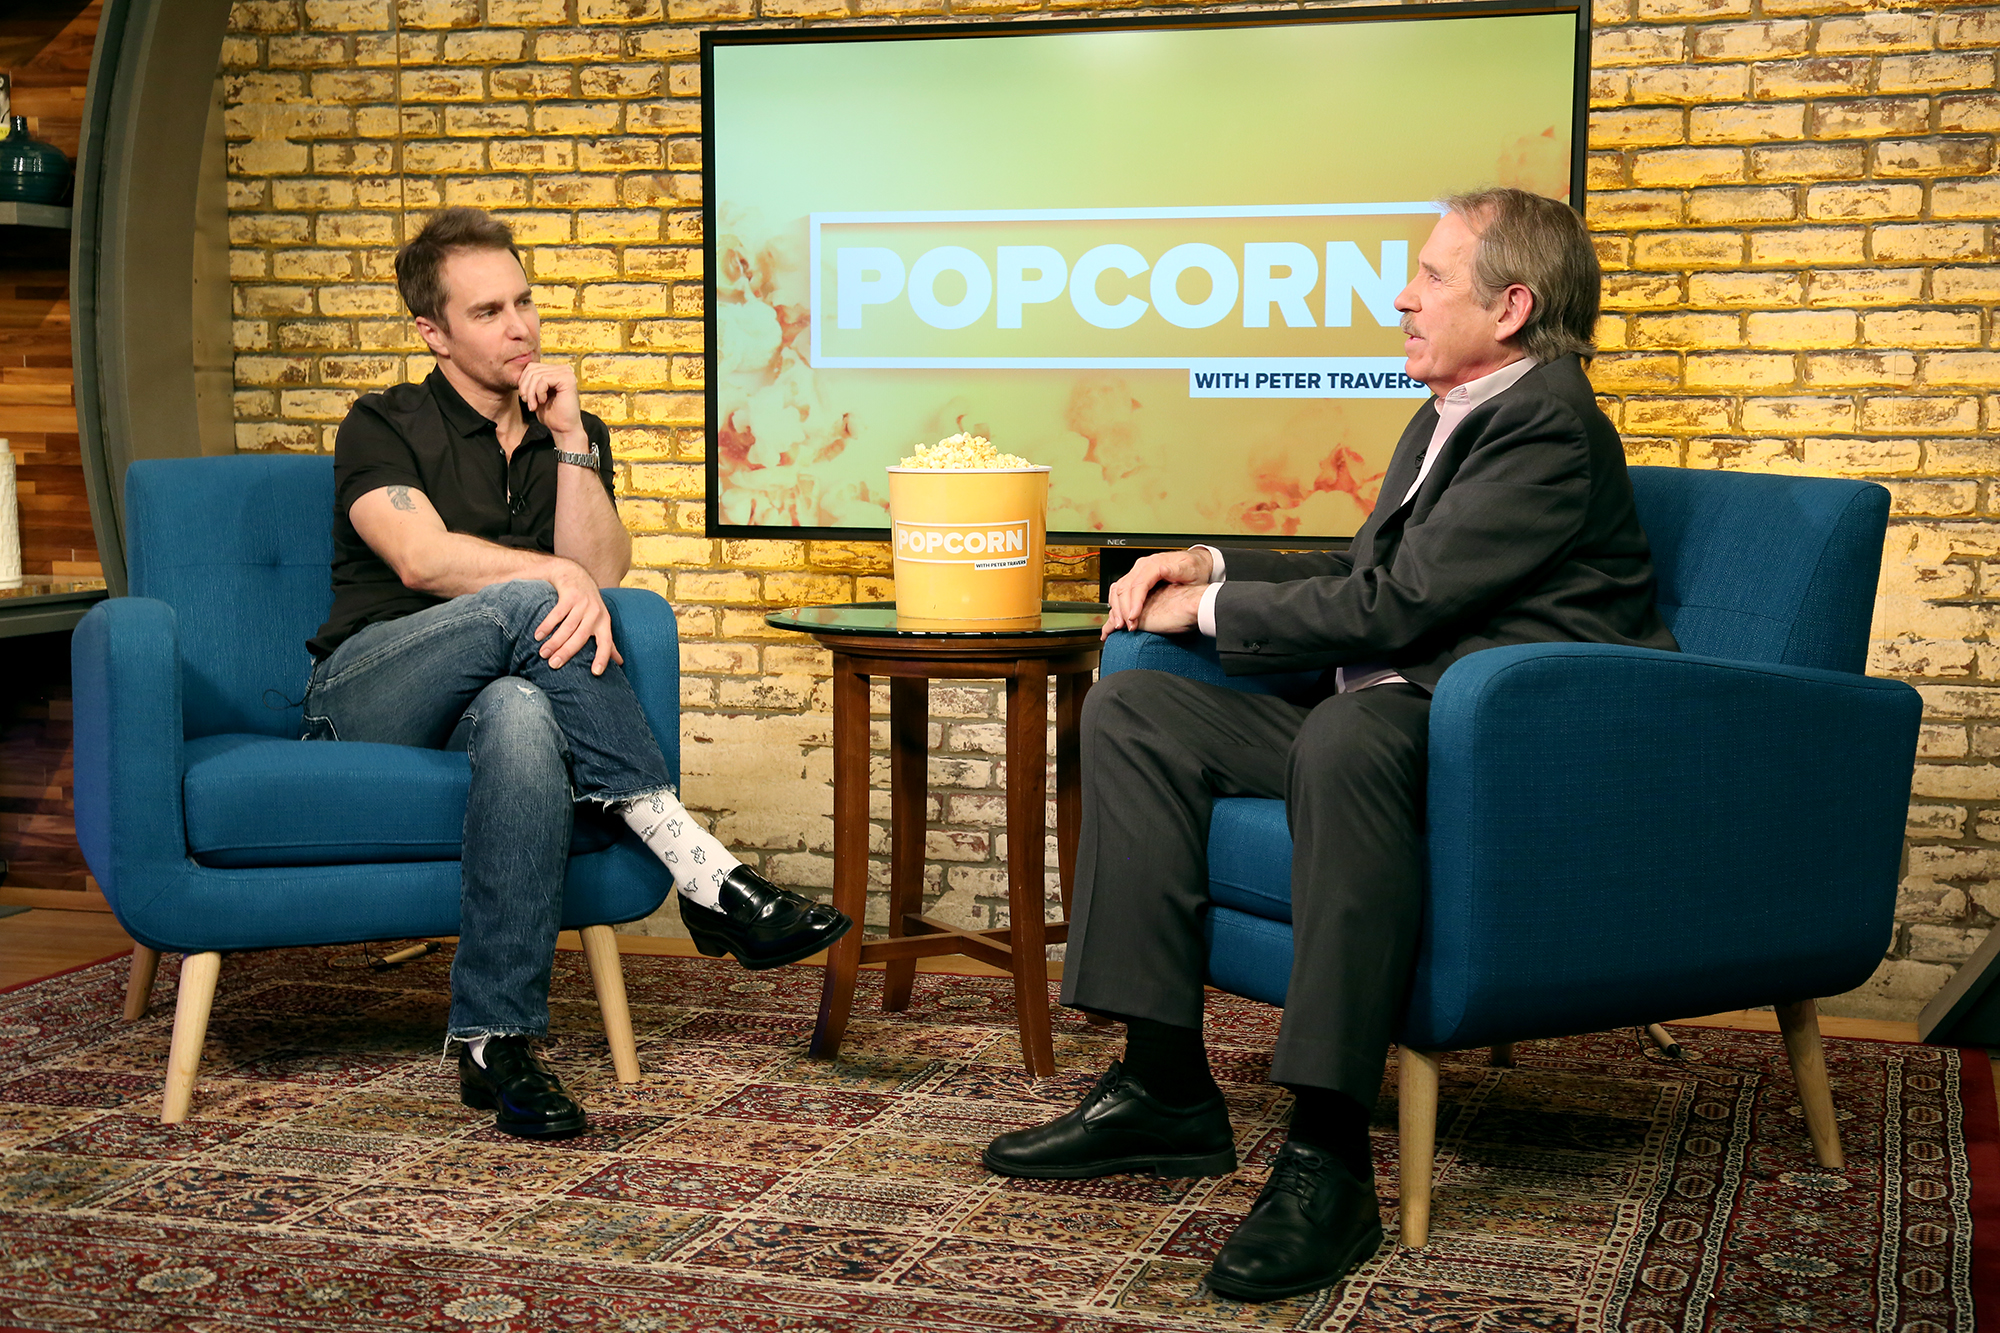 PHOTO: Sam Rockwell appears on "Popcorn with Peter Travers" at ABC News studios, Nov. 17, 2017, in New York City.